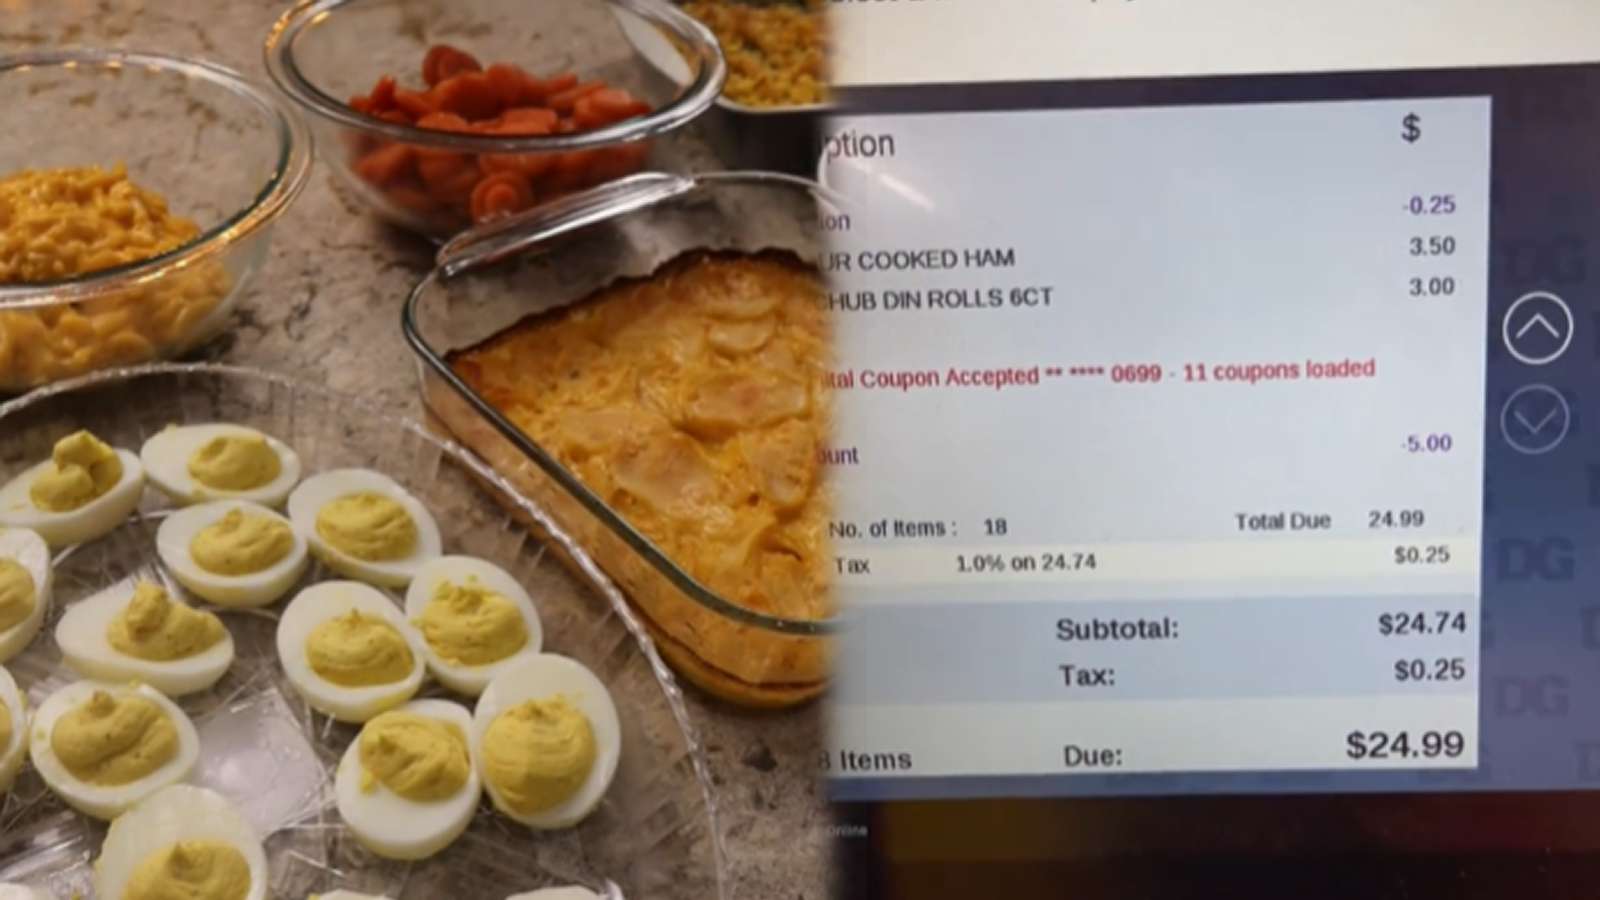 Woman stuns viewers with incredible Dollar General Christmas dinner for $25